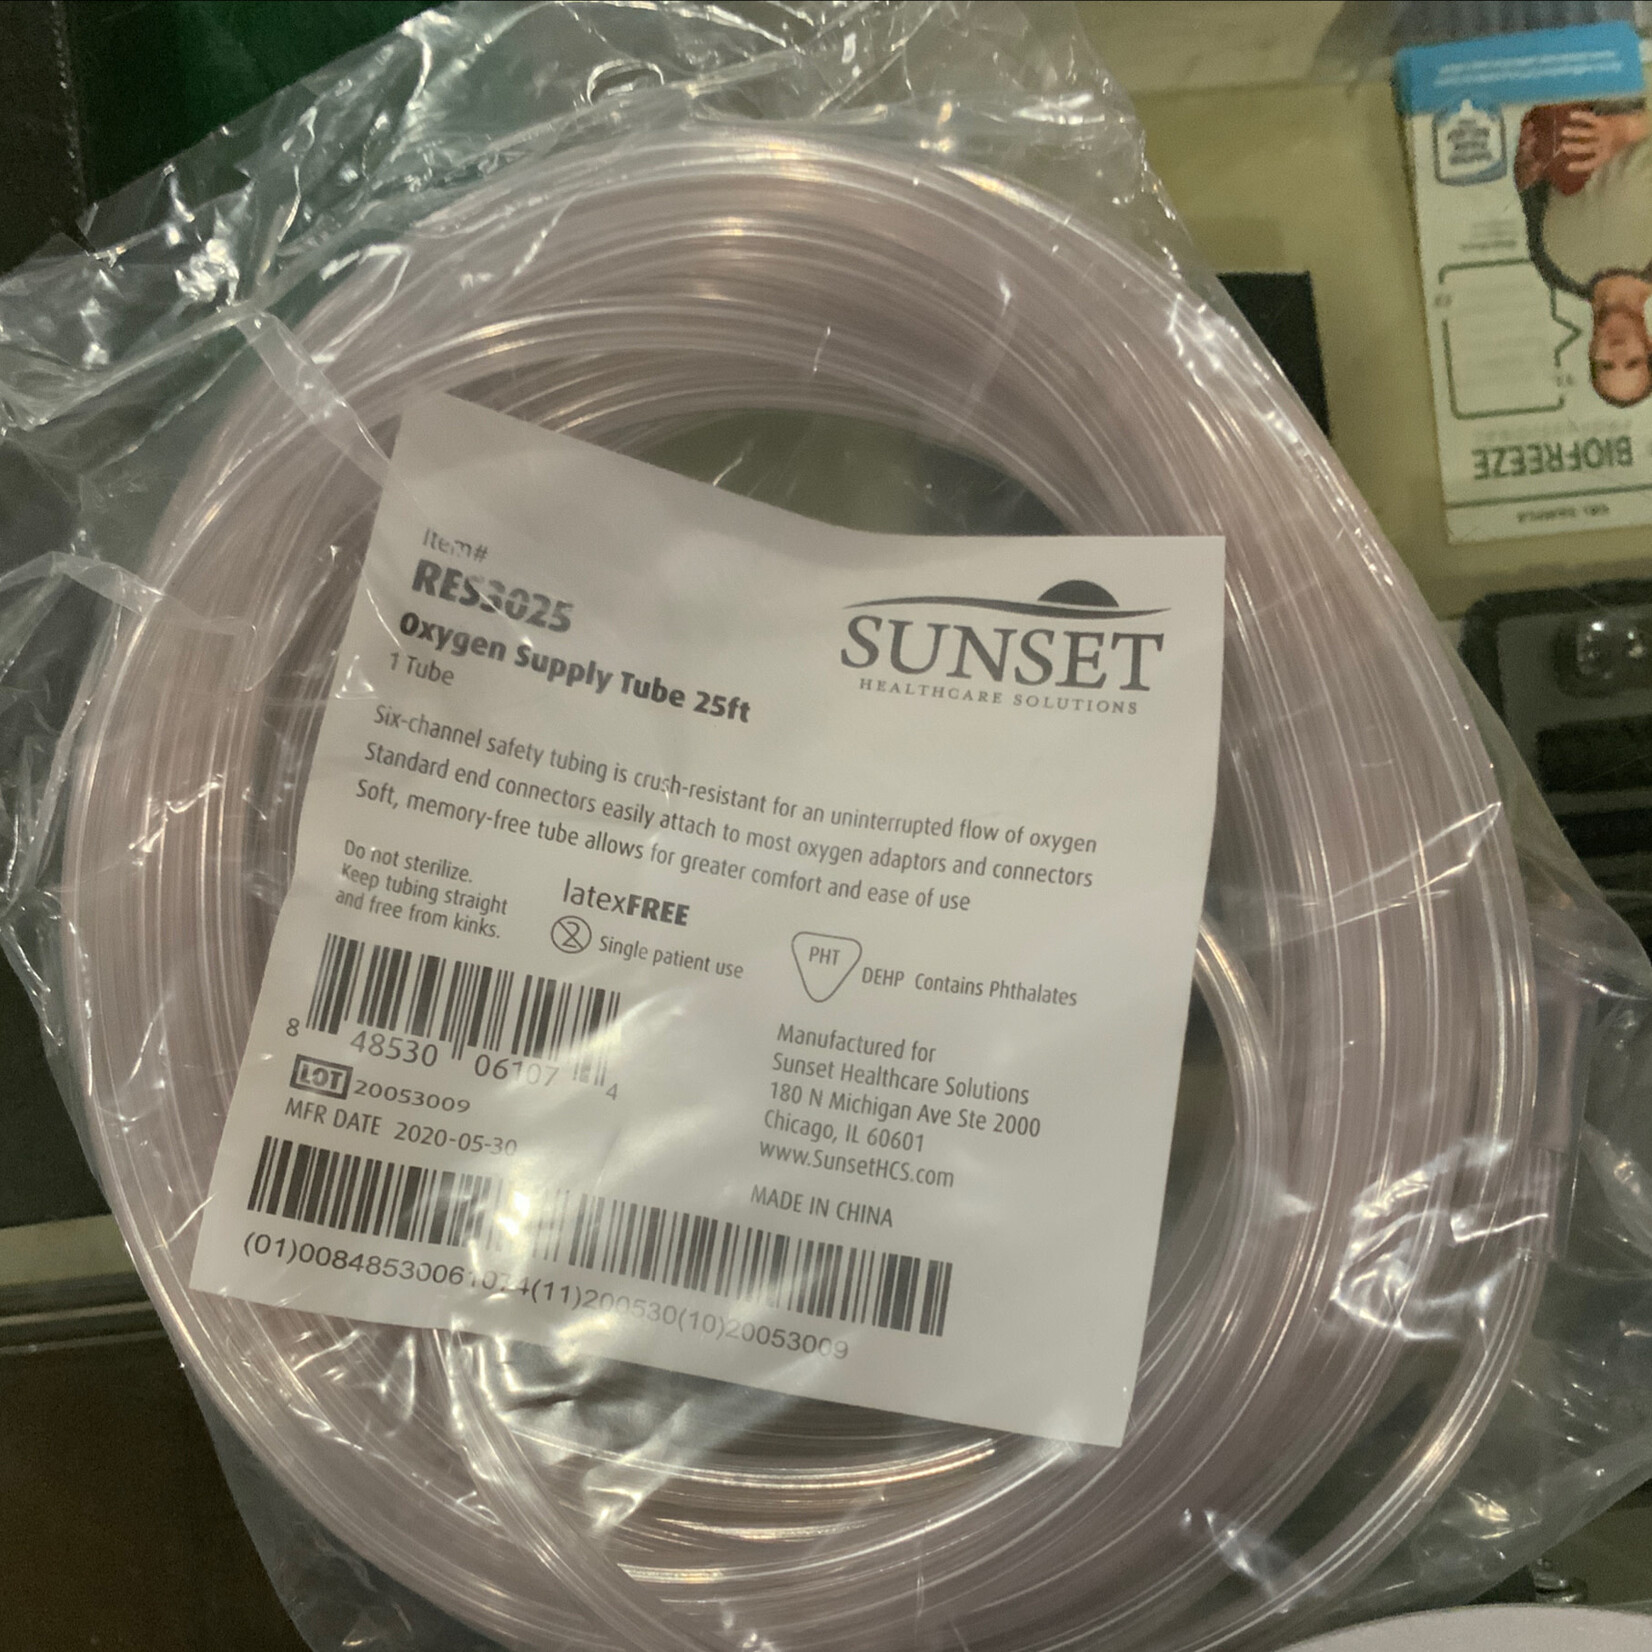 Sunset Health care Soutions 25’ Oxygen Tubing